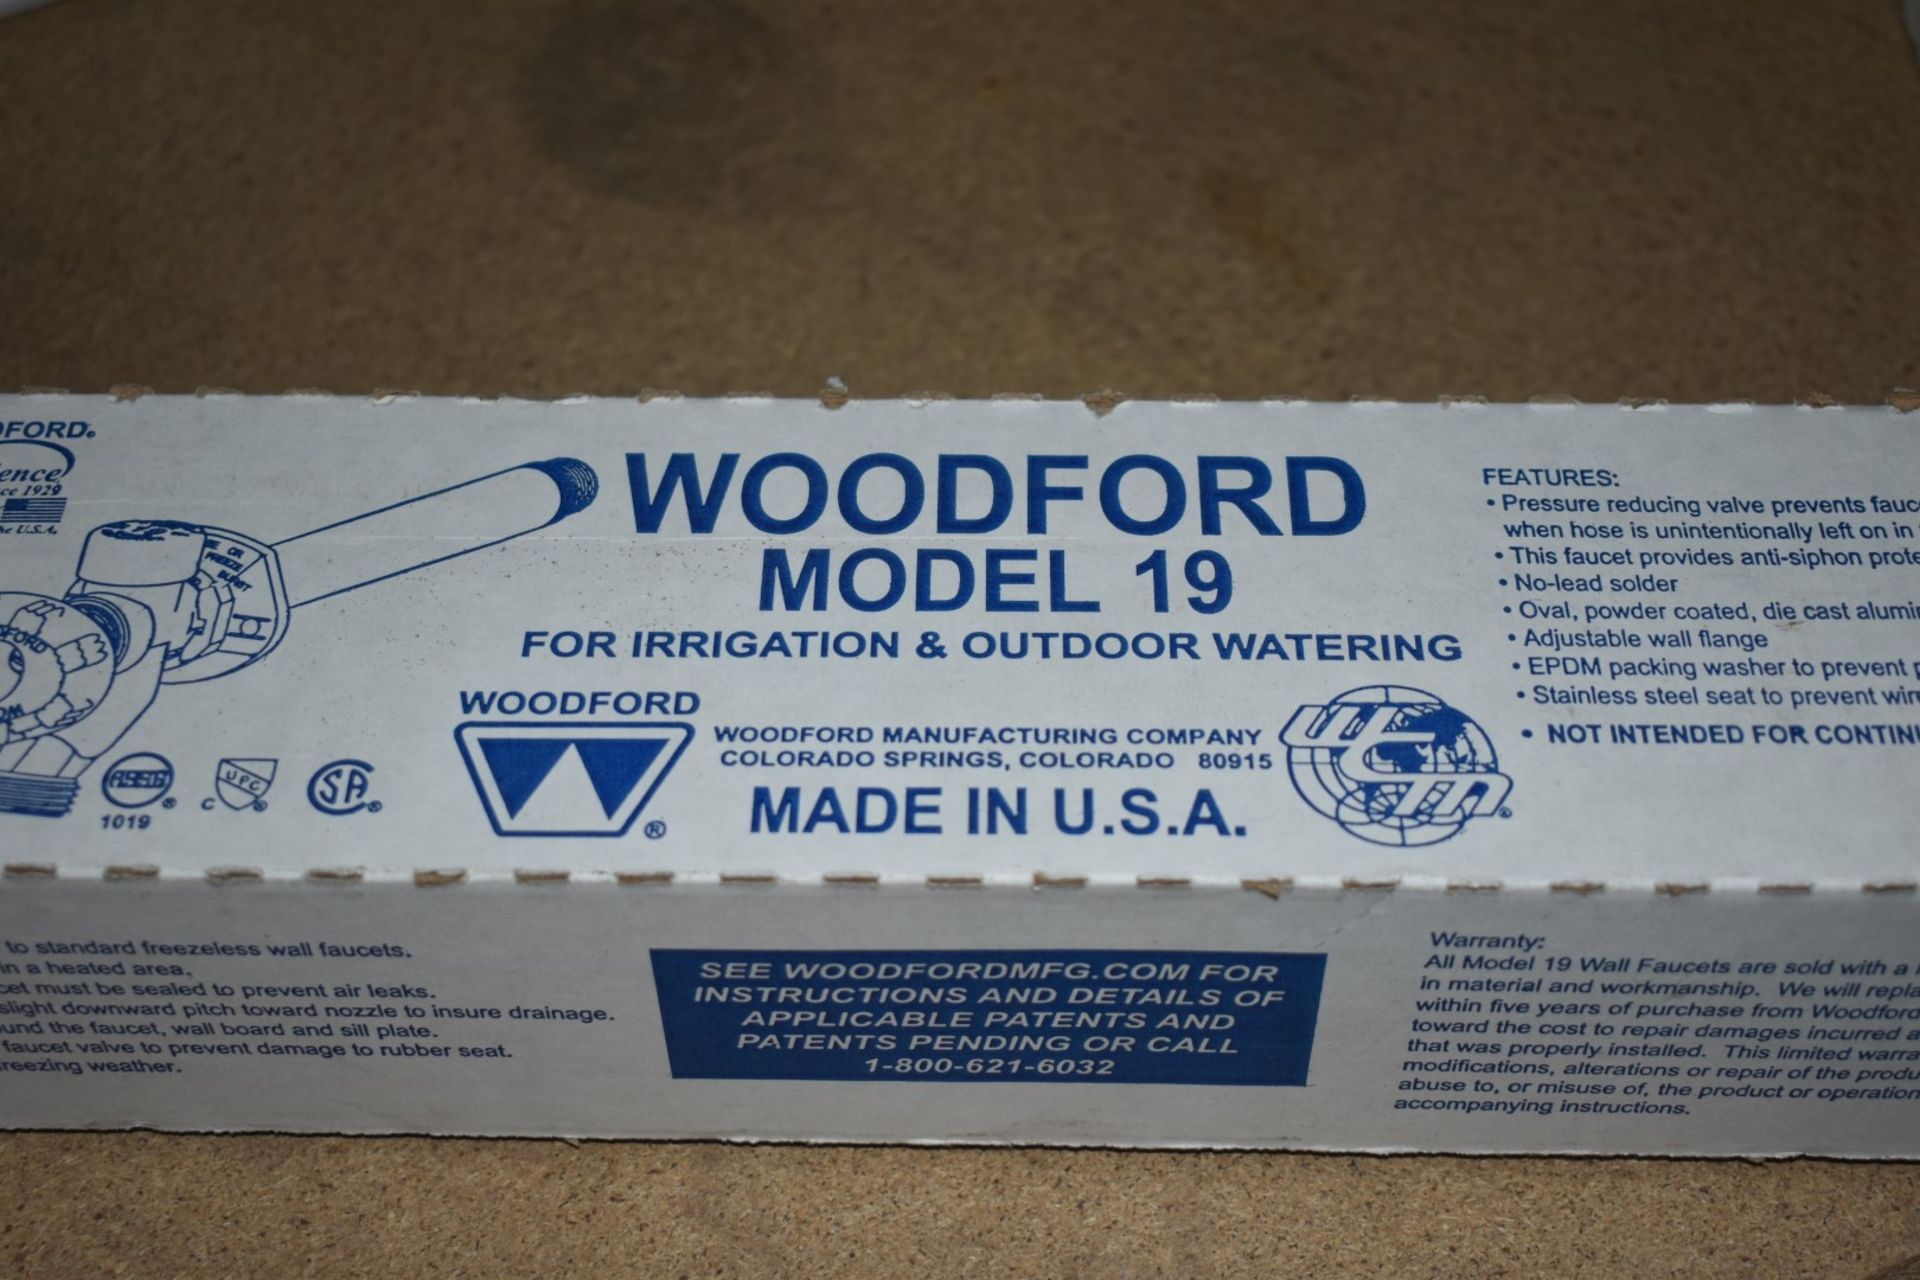 1 x Woodford Model 19 Brass Freezeless Wall Faucet - New and Boxed - RRP £70 - Ref WHC105 WH1 - - Image 4 of 4